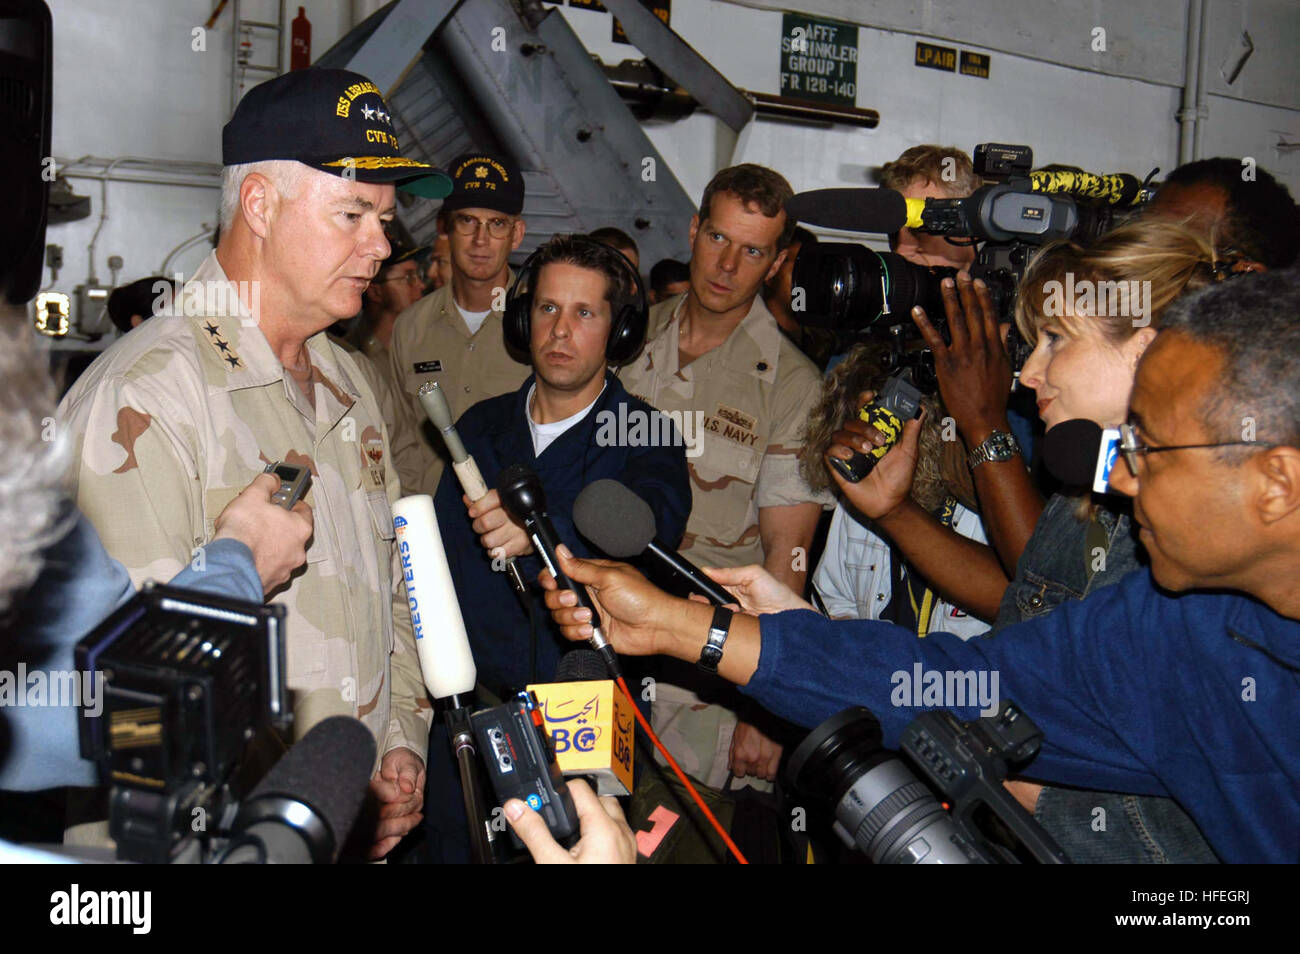 030319-N-9593M-022 The Arabian Gulf (Mar. 19, 2003) -- Vice Adm. Timothy J. Keating Commander, U.S. Naval Forces Central Command/ Commander Fifth Fleet takes questions from a pool of national and international print and broadcast media during a visit with crew aboard the aircraft carrier USS Abraham Lincoln (CVN 72).  Lincoln and Carrier Air Wing Fourteen (CVW-14) are conducting combat operations in support of Operation Southern Watch.  U.S. Navy photo by Photographer's Mate 3rd Class Philip A. McDaniel.  (RELEASED) US Navy 030319-N-9593M-022 Vice Adm. Timothy J. Keating Commander takes questi Stock Photo